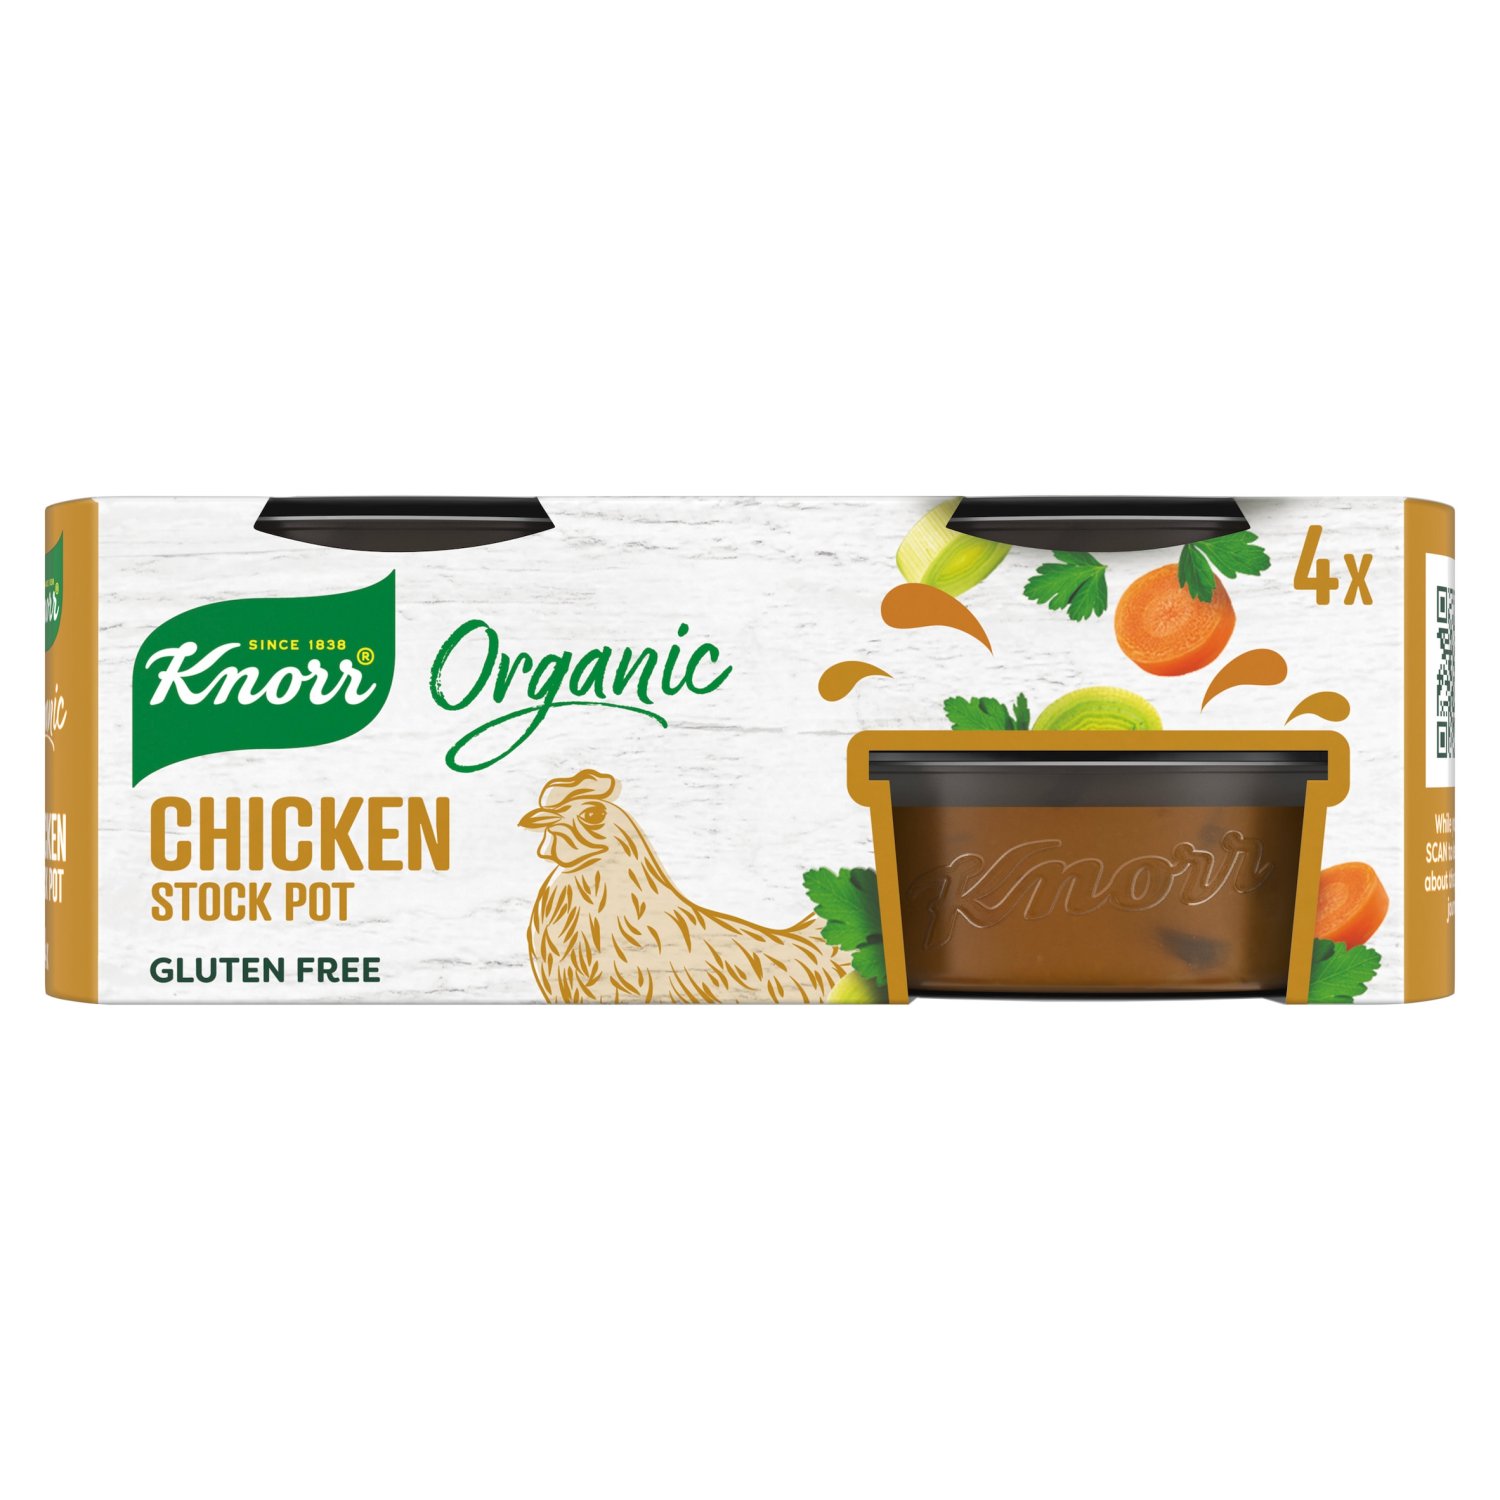 Knorr Organic Chicken Stock Pot 4 Pack (104 g)